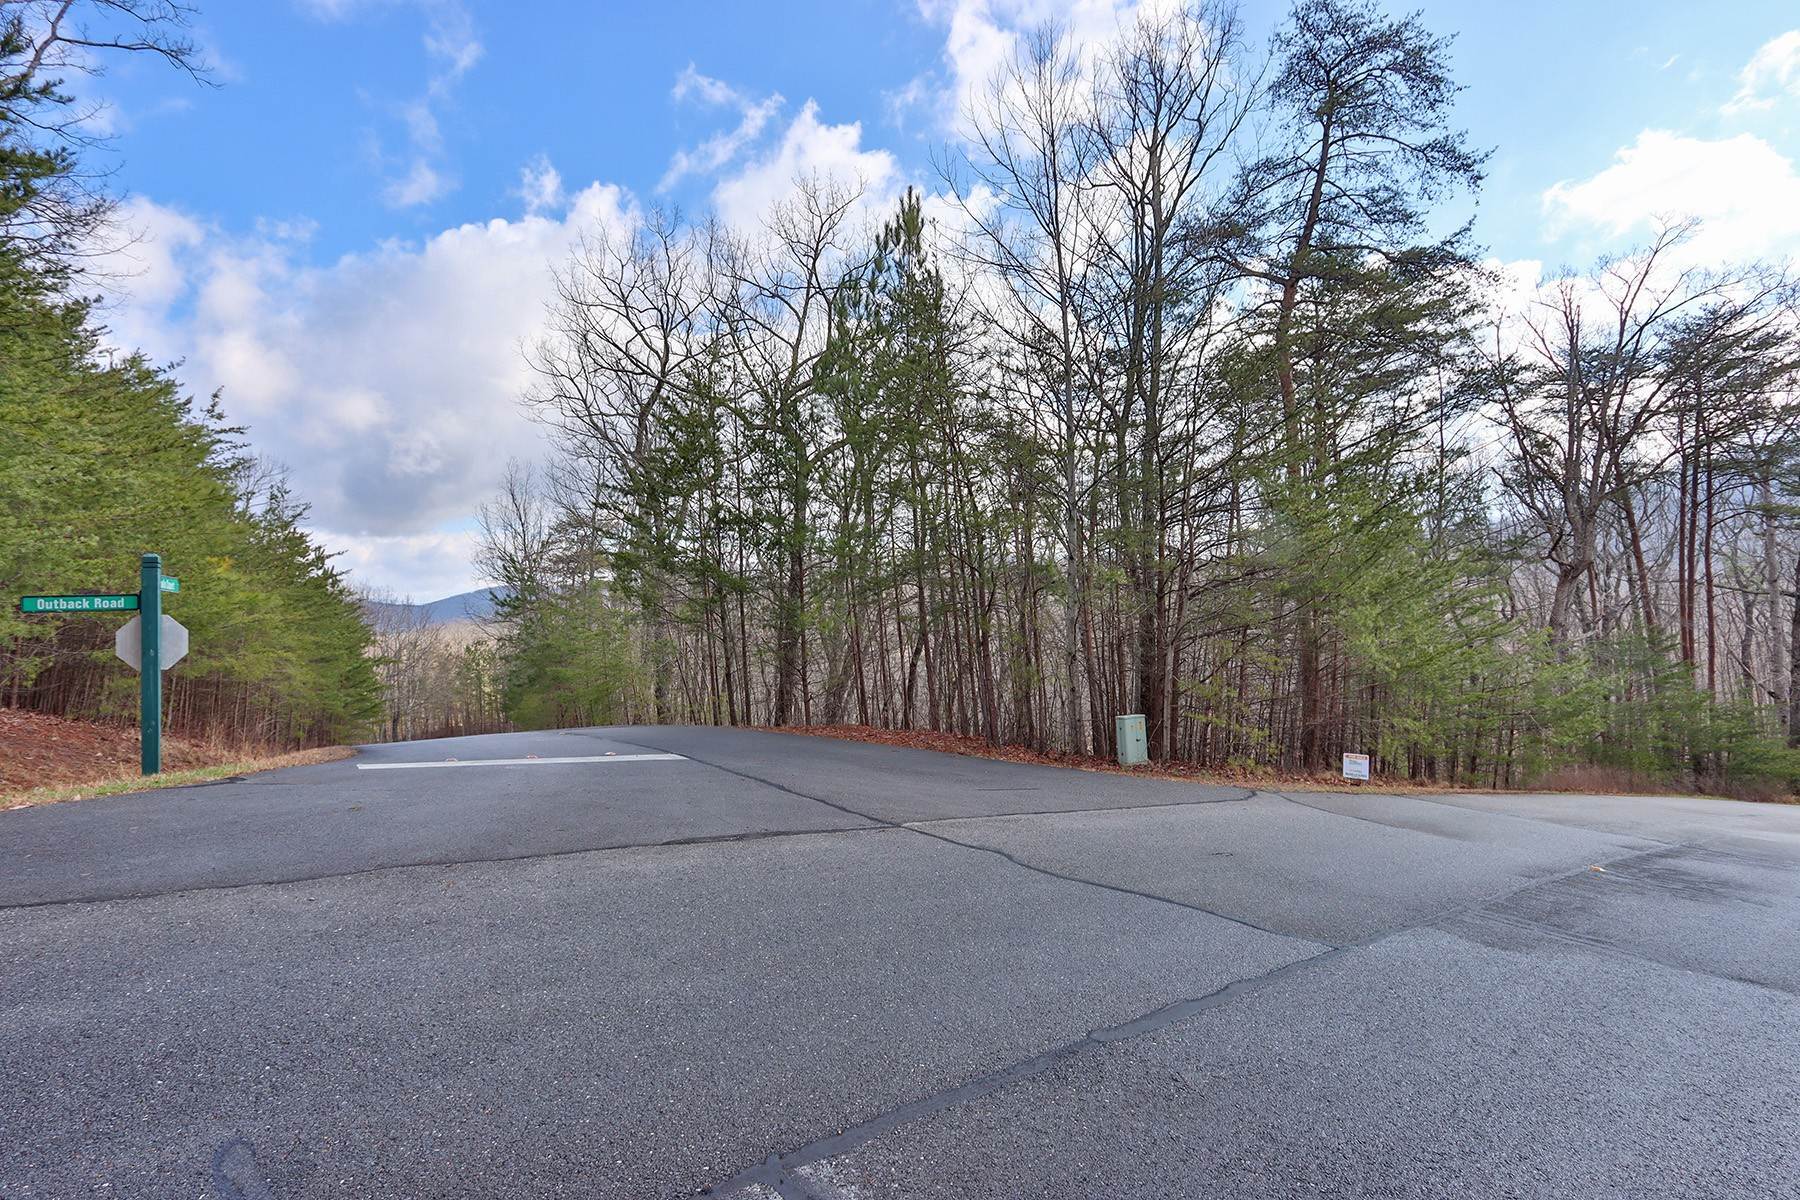 7. Land for Sale at Private Lot in Quiet, Scenic Mountain Community 26 Outback Road Jasper, Georgia 30143 United States